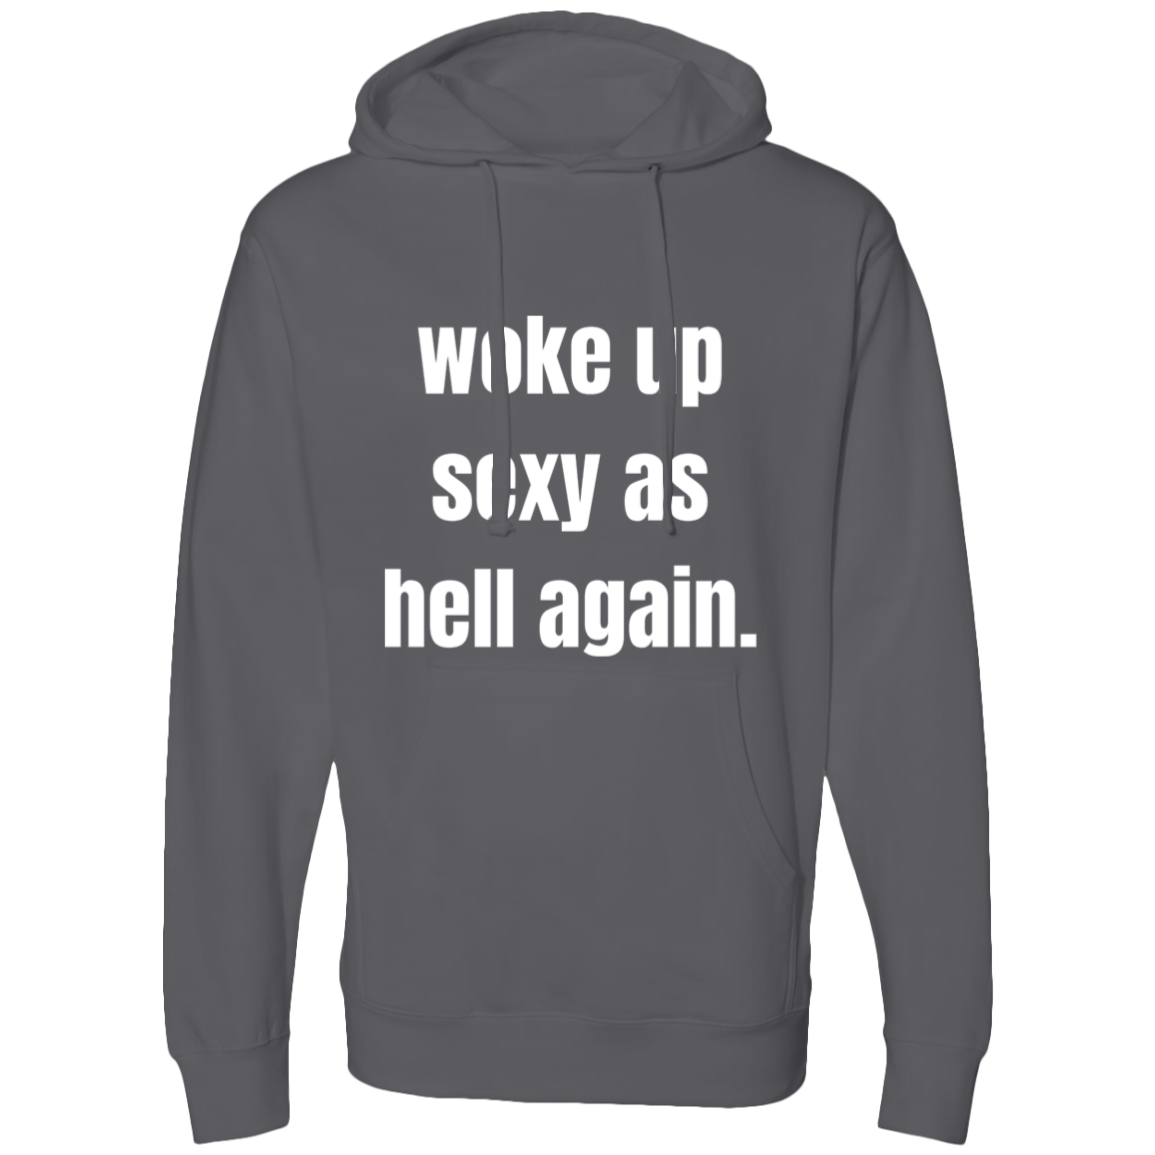 woke up sexy as hell again. Hooded Sweatshirt for that sexy someone in your life!